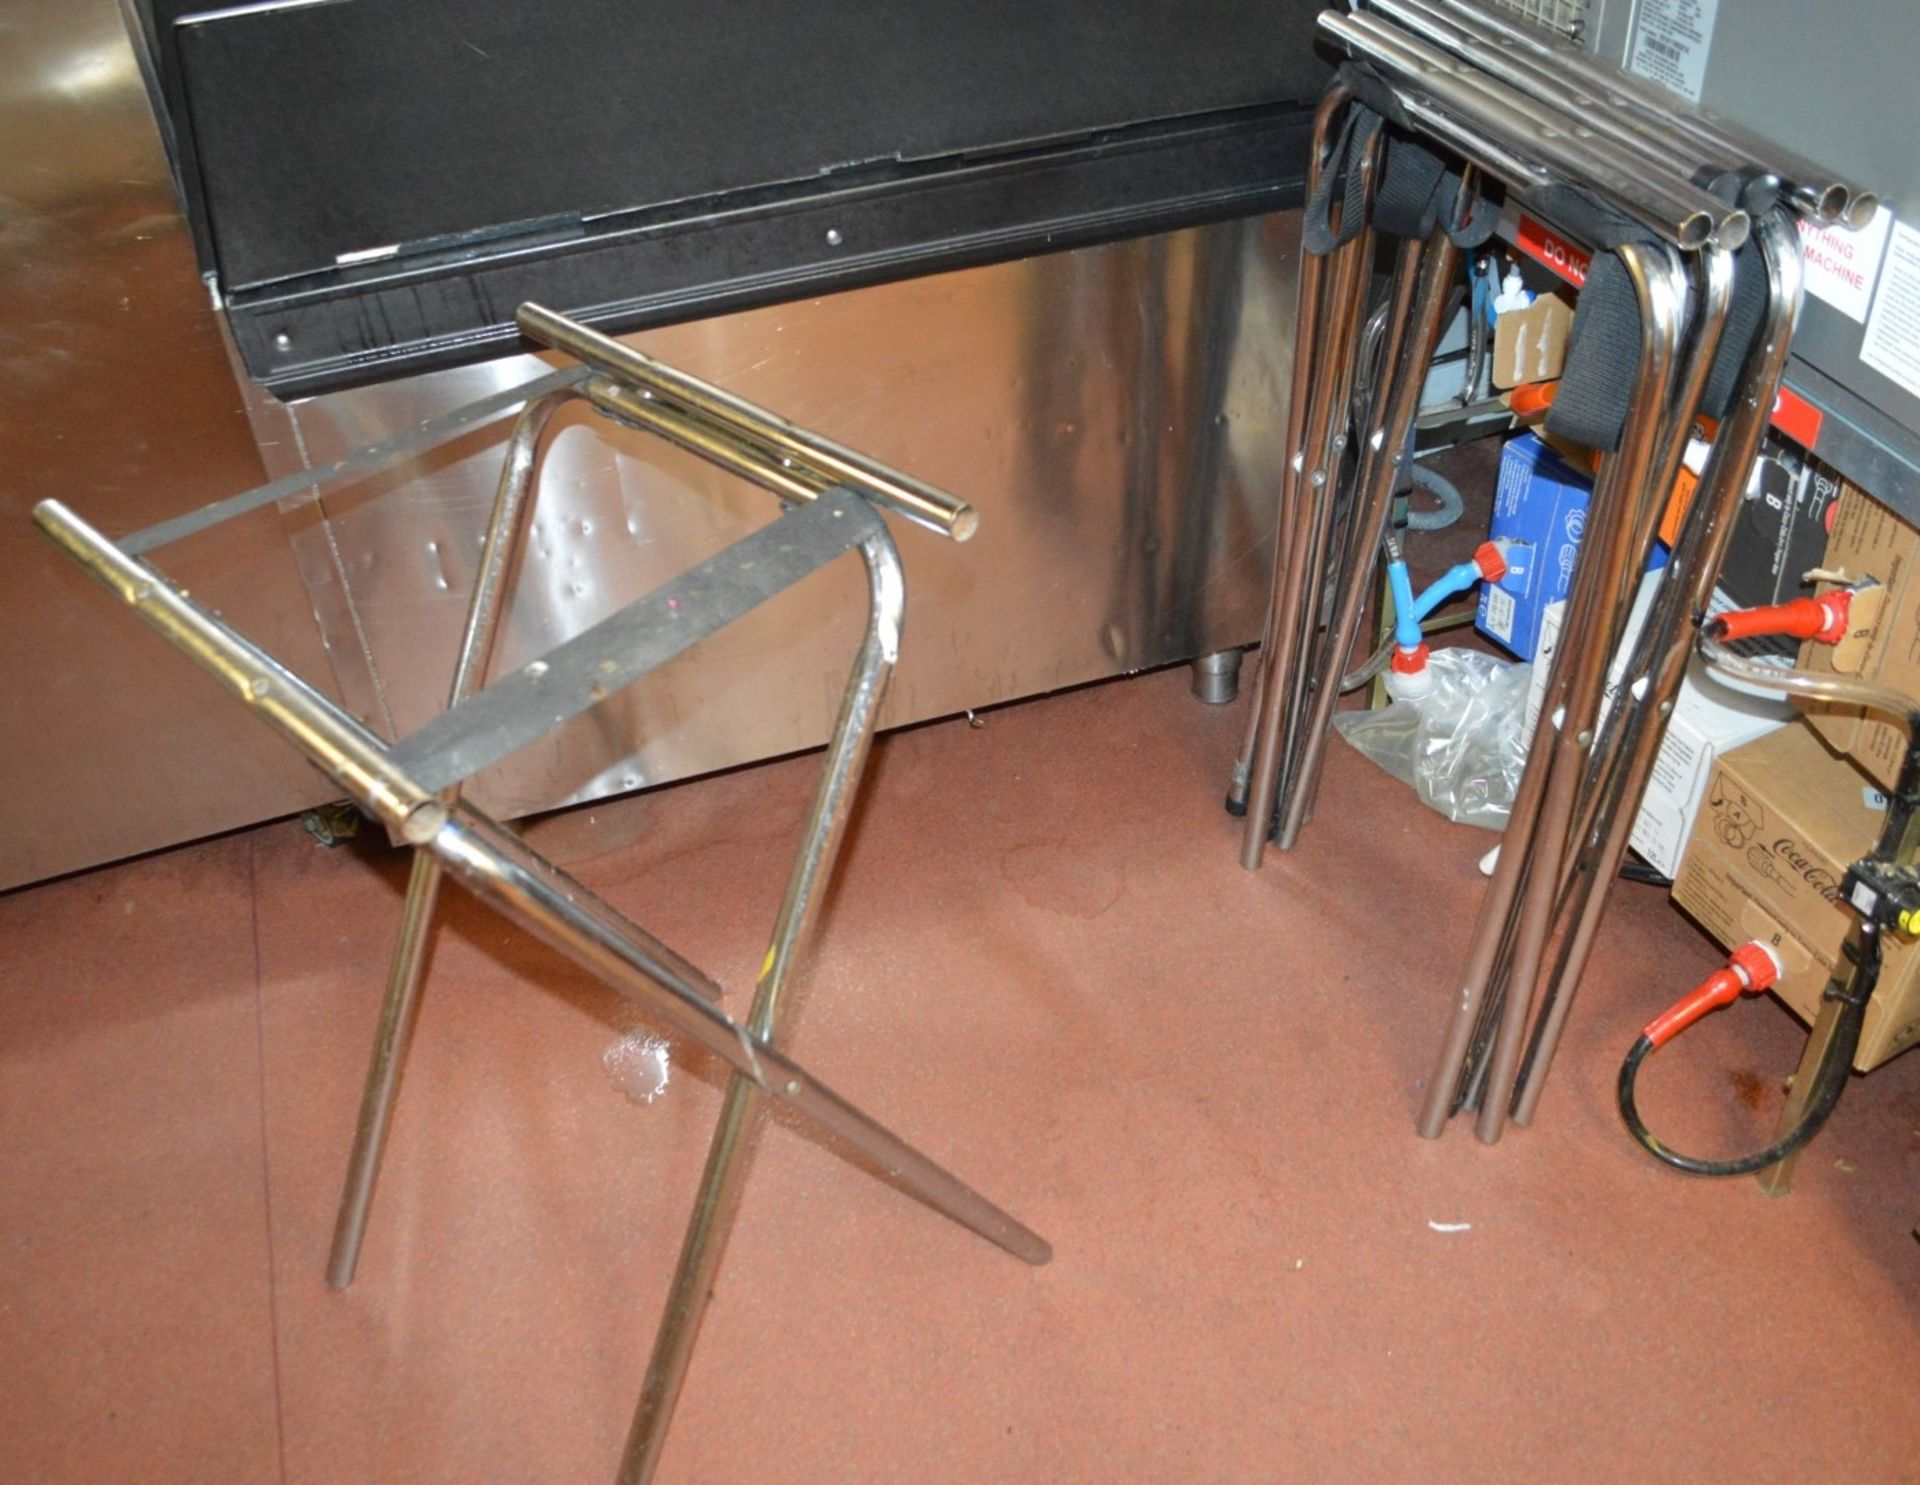 7 x Chrome Food Tray Stands With Food Trays - CL357 - Location: Bolton BL6 This lot will incur a - Image 3 of 3